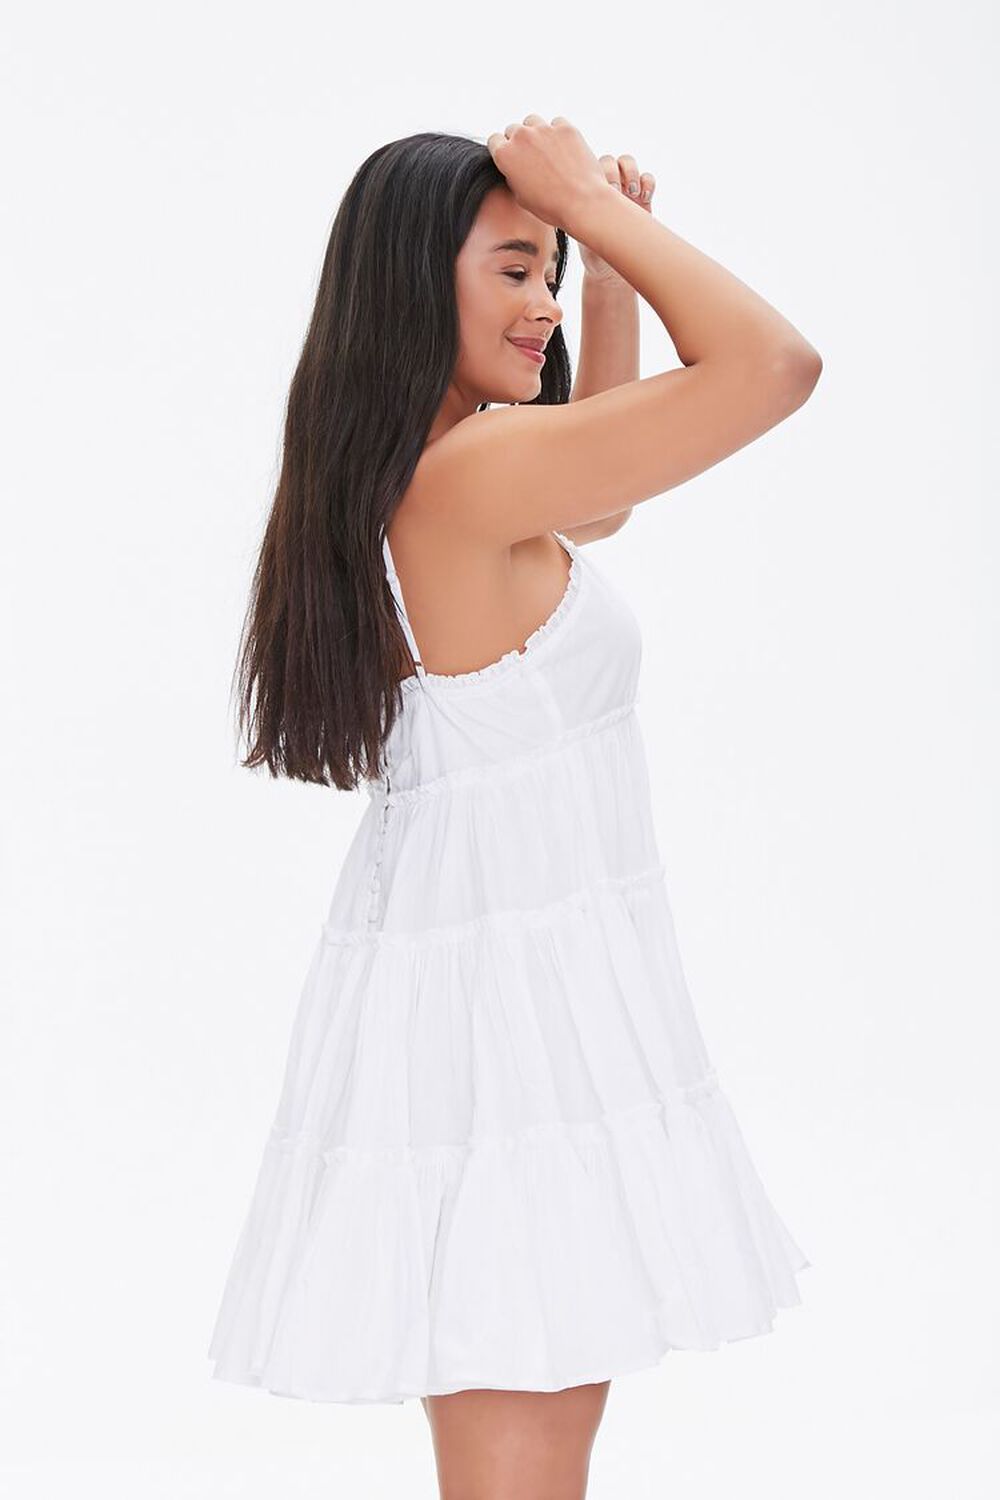 WHITE Tiered Fit & Flare Mini Dress, image 2